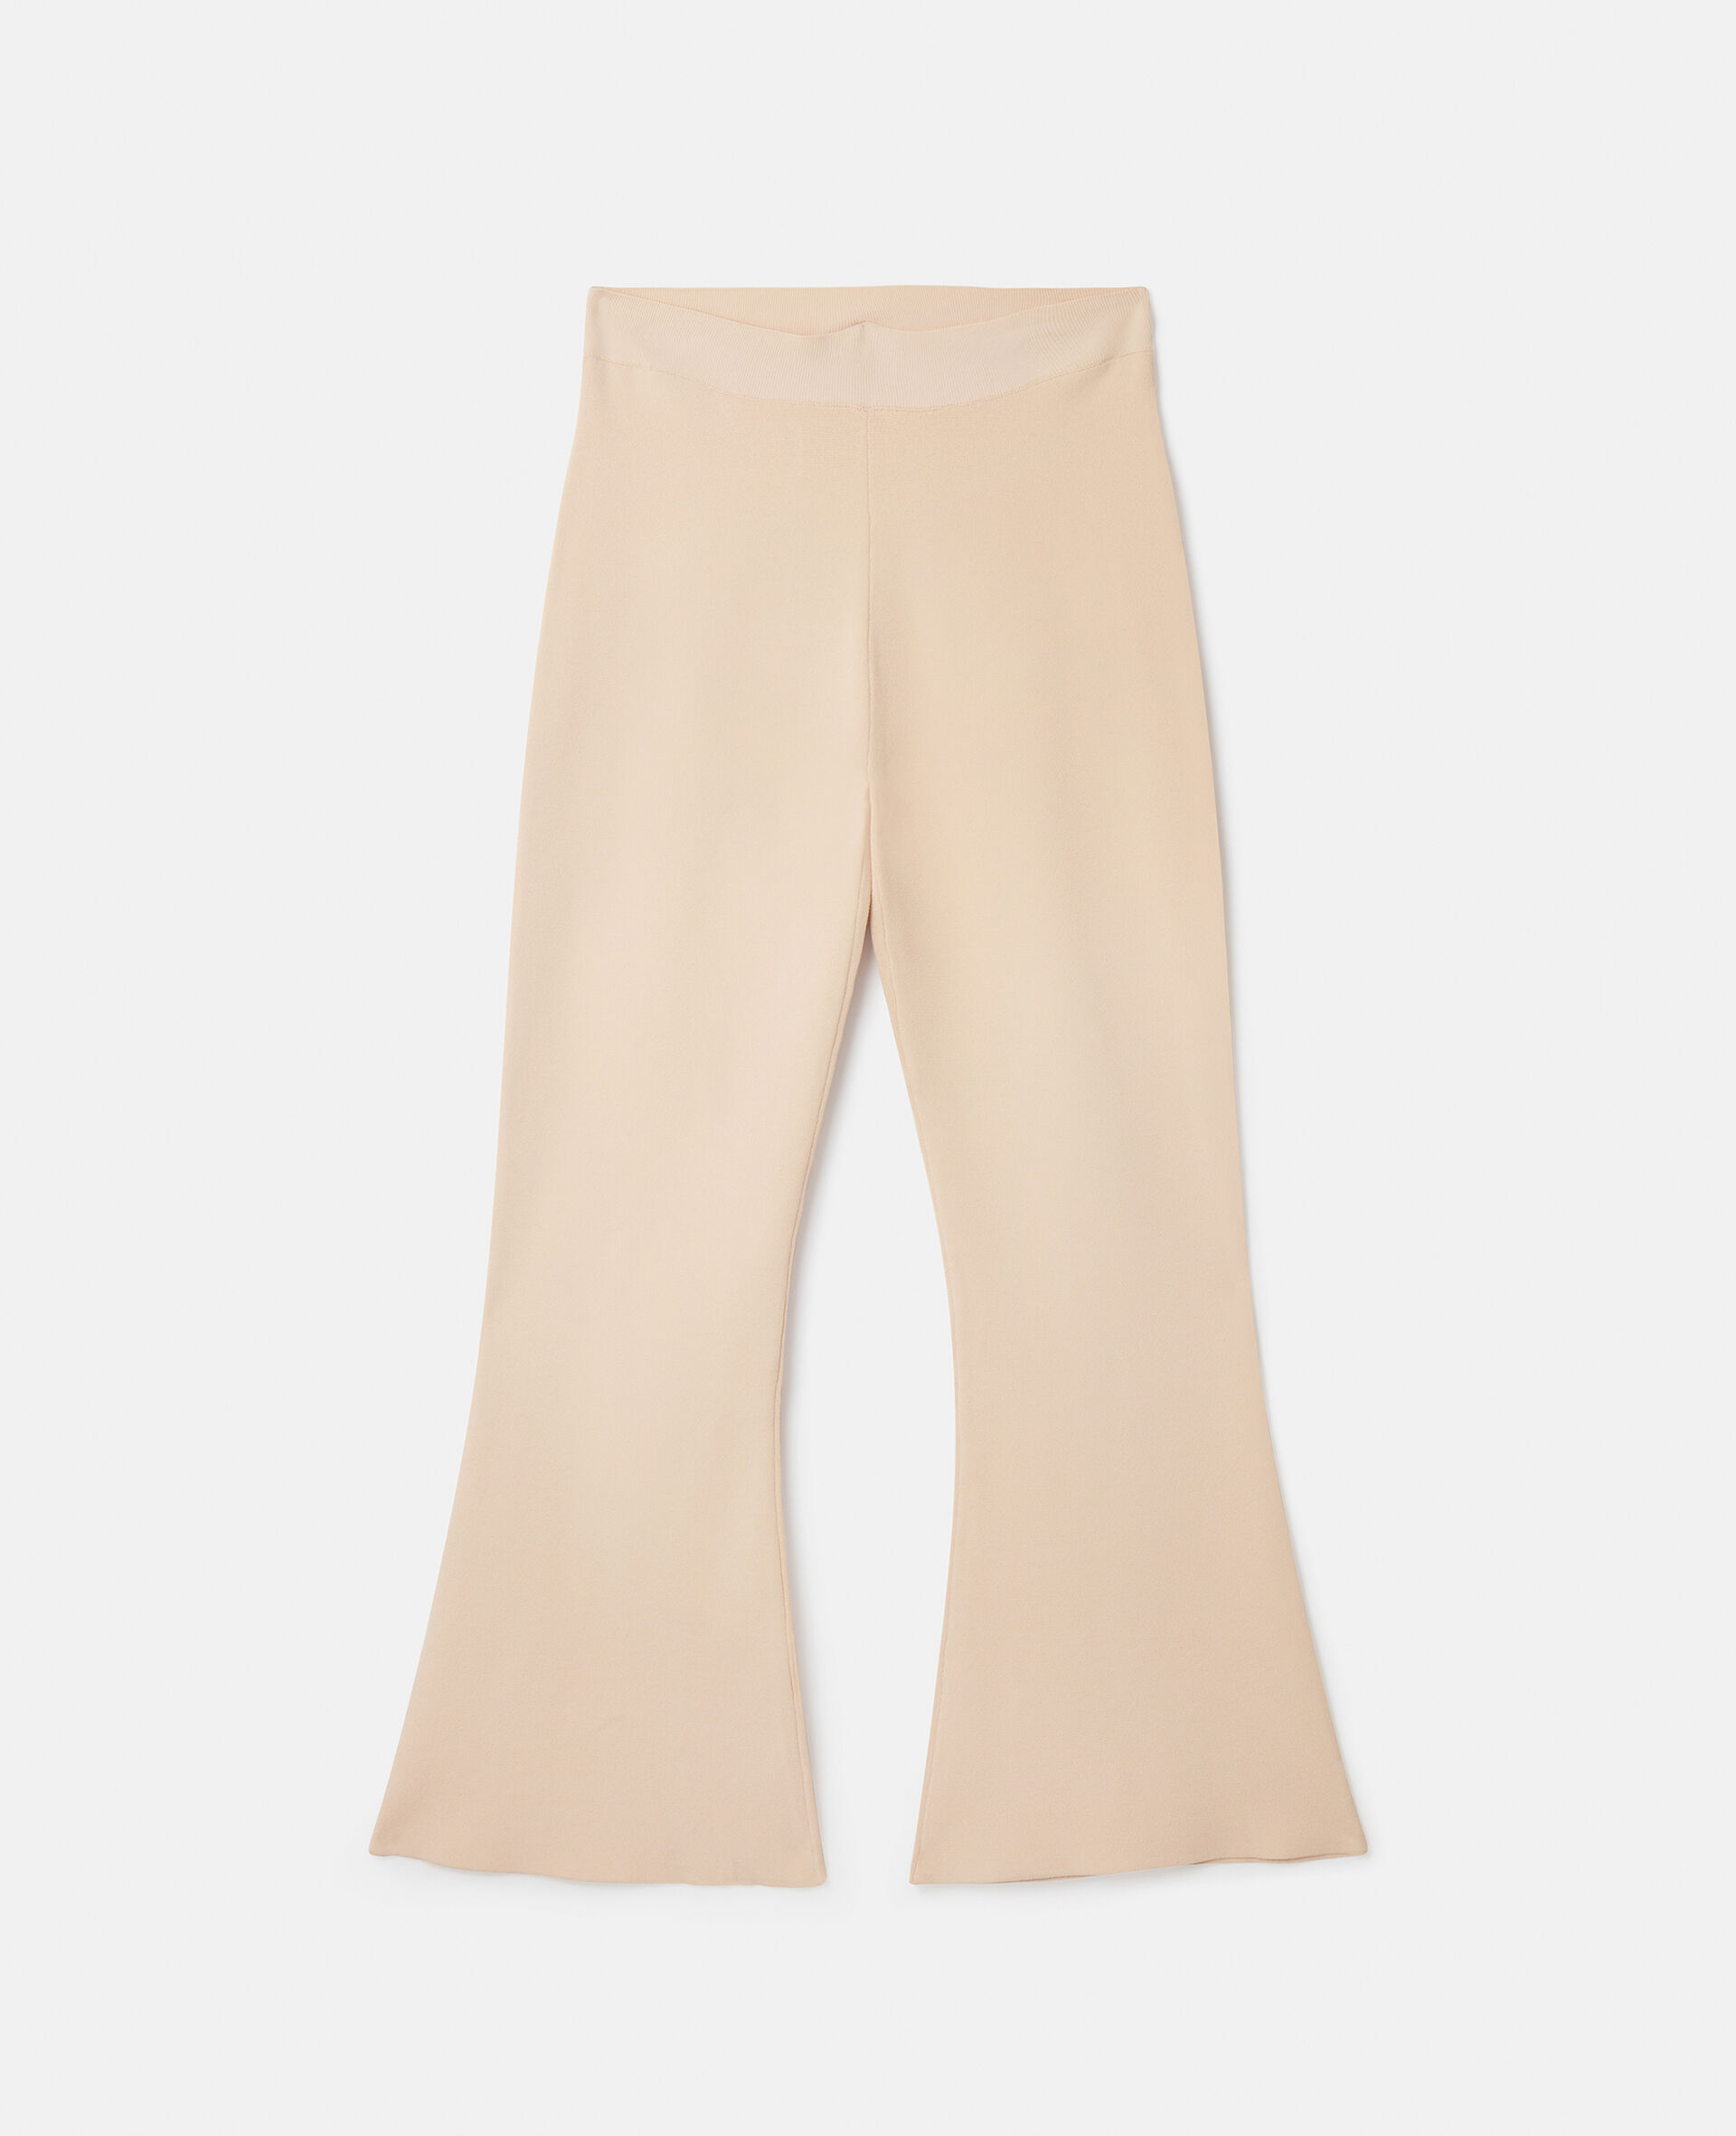 Compact Knit Cropped Flared Trousers-Cream-large image number 0